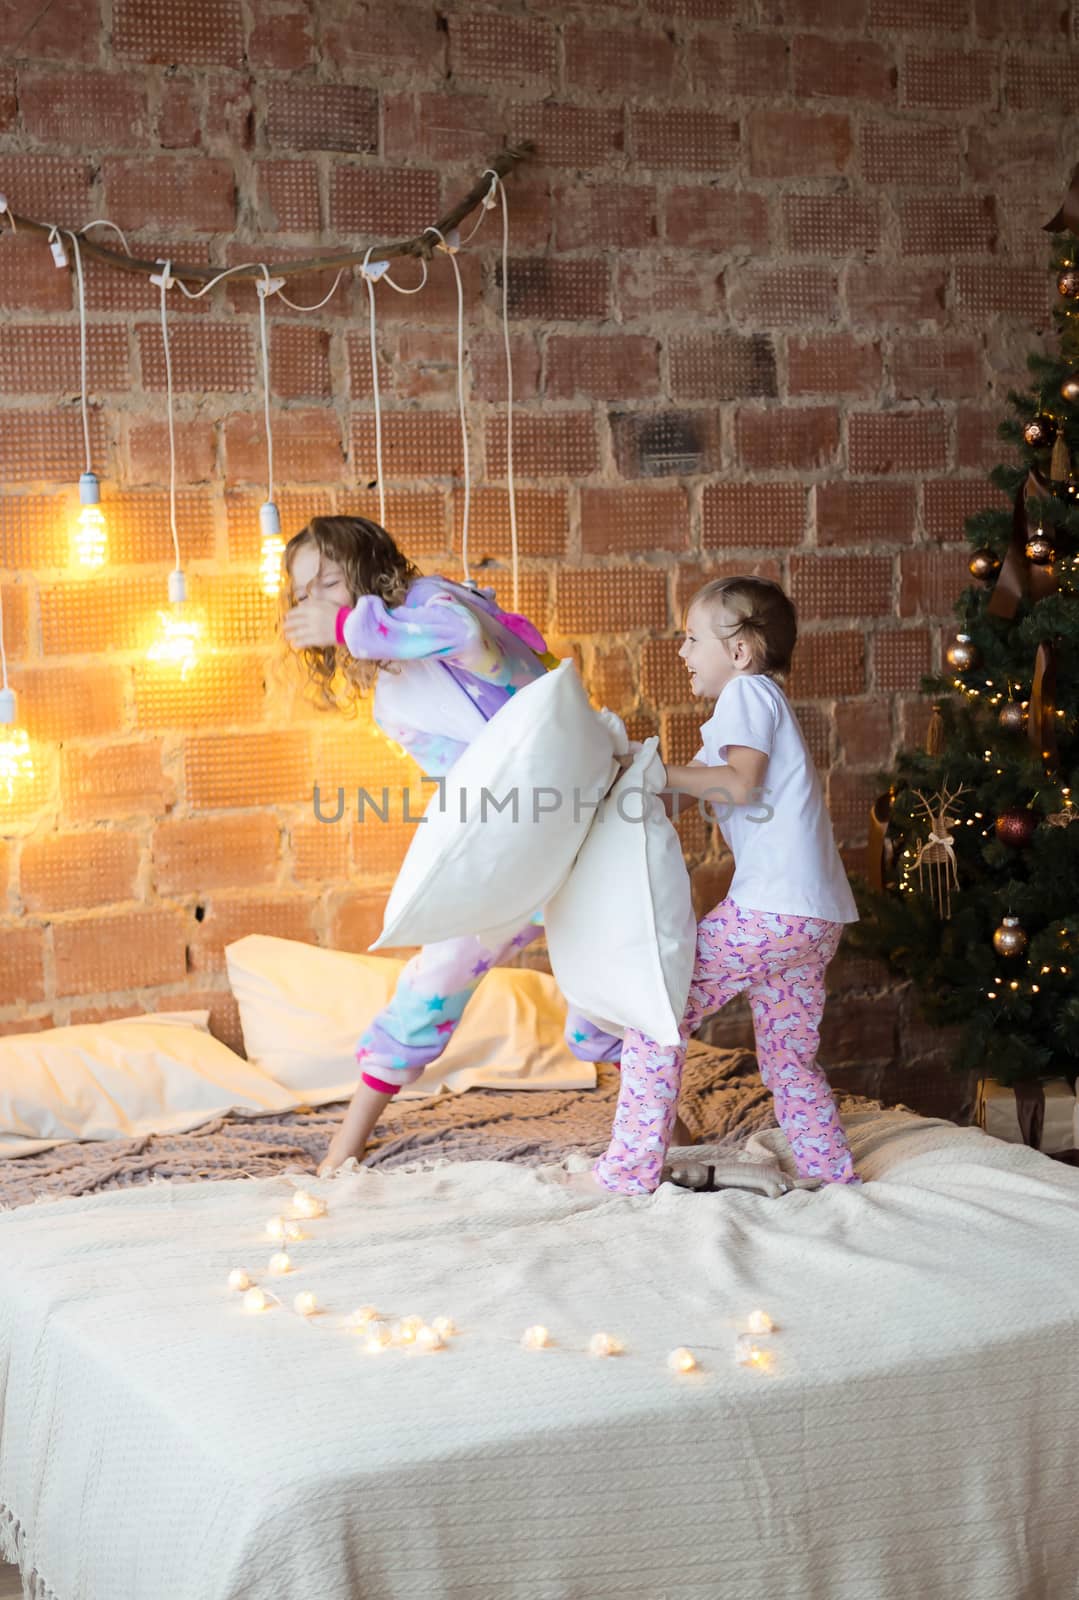 .Little sisters in pajamas on the bed fight with pillows against the background of christmas garlands